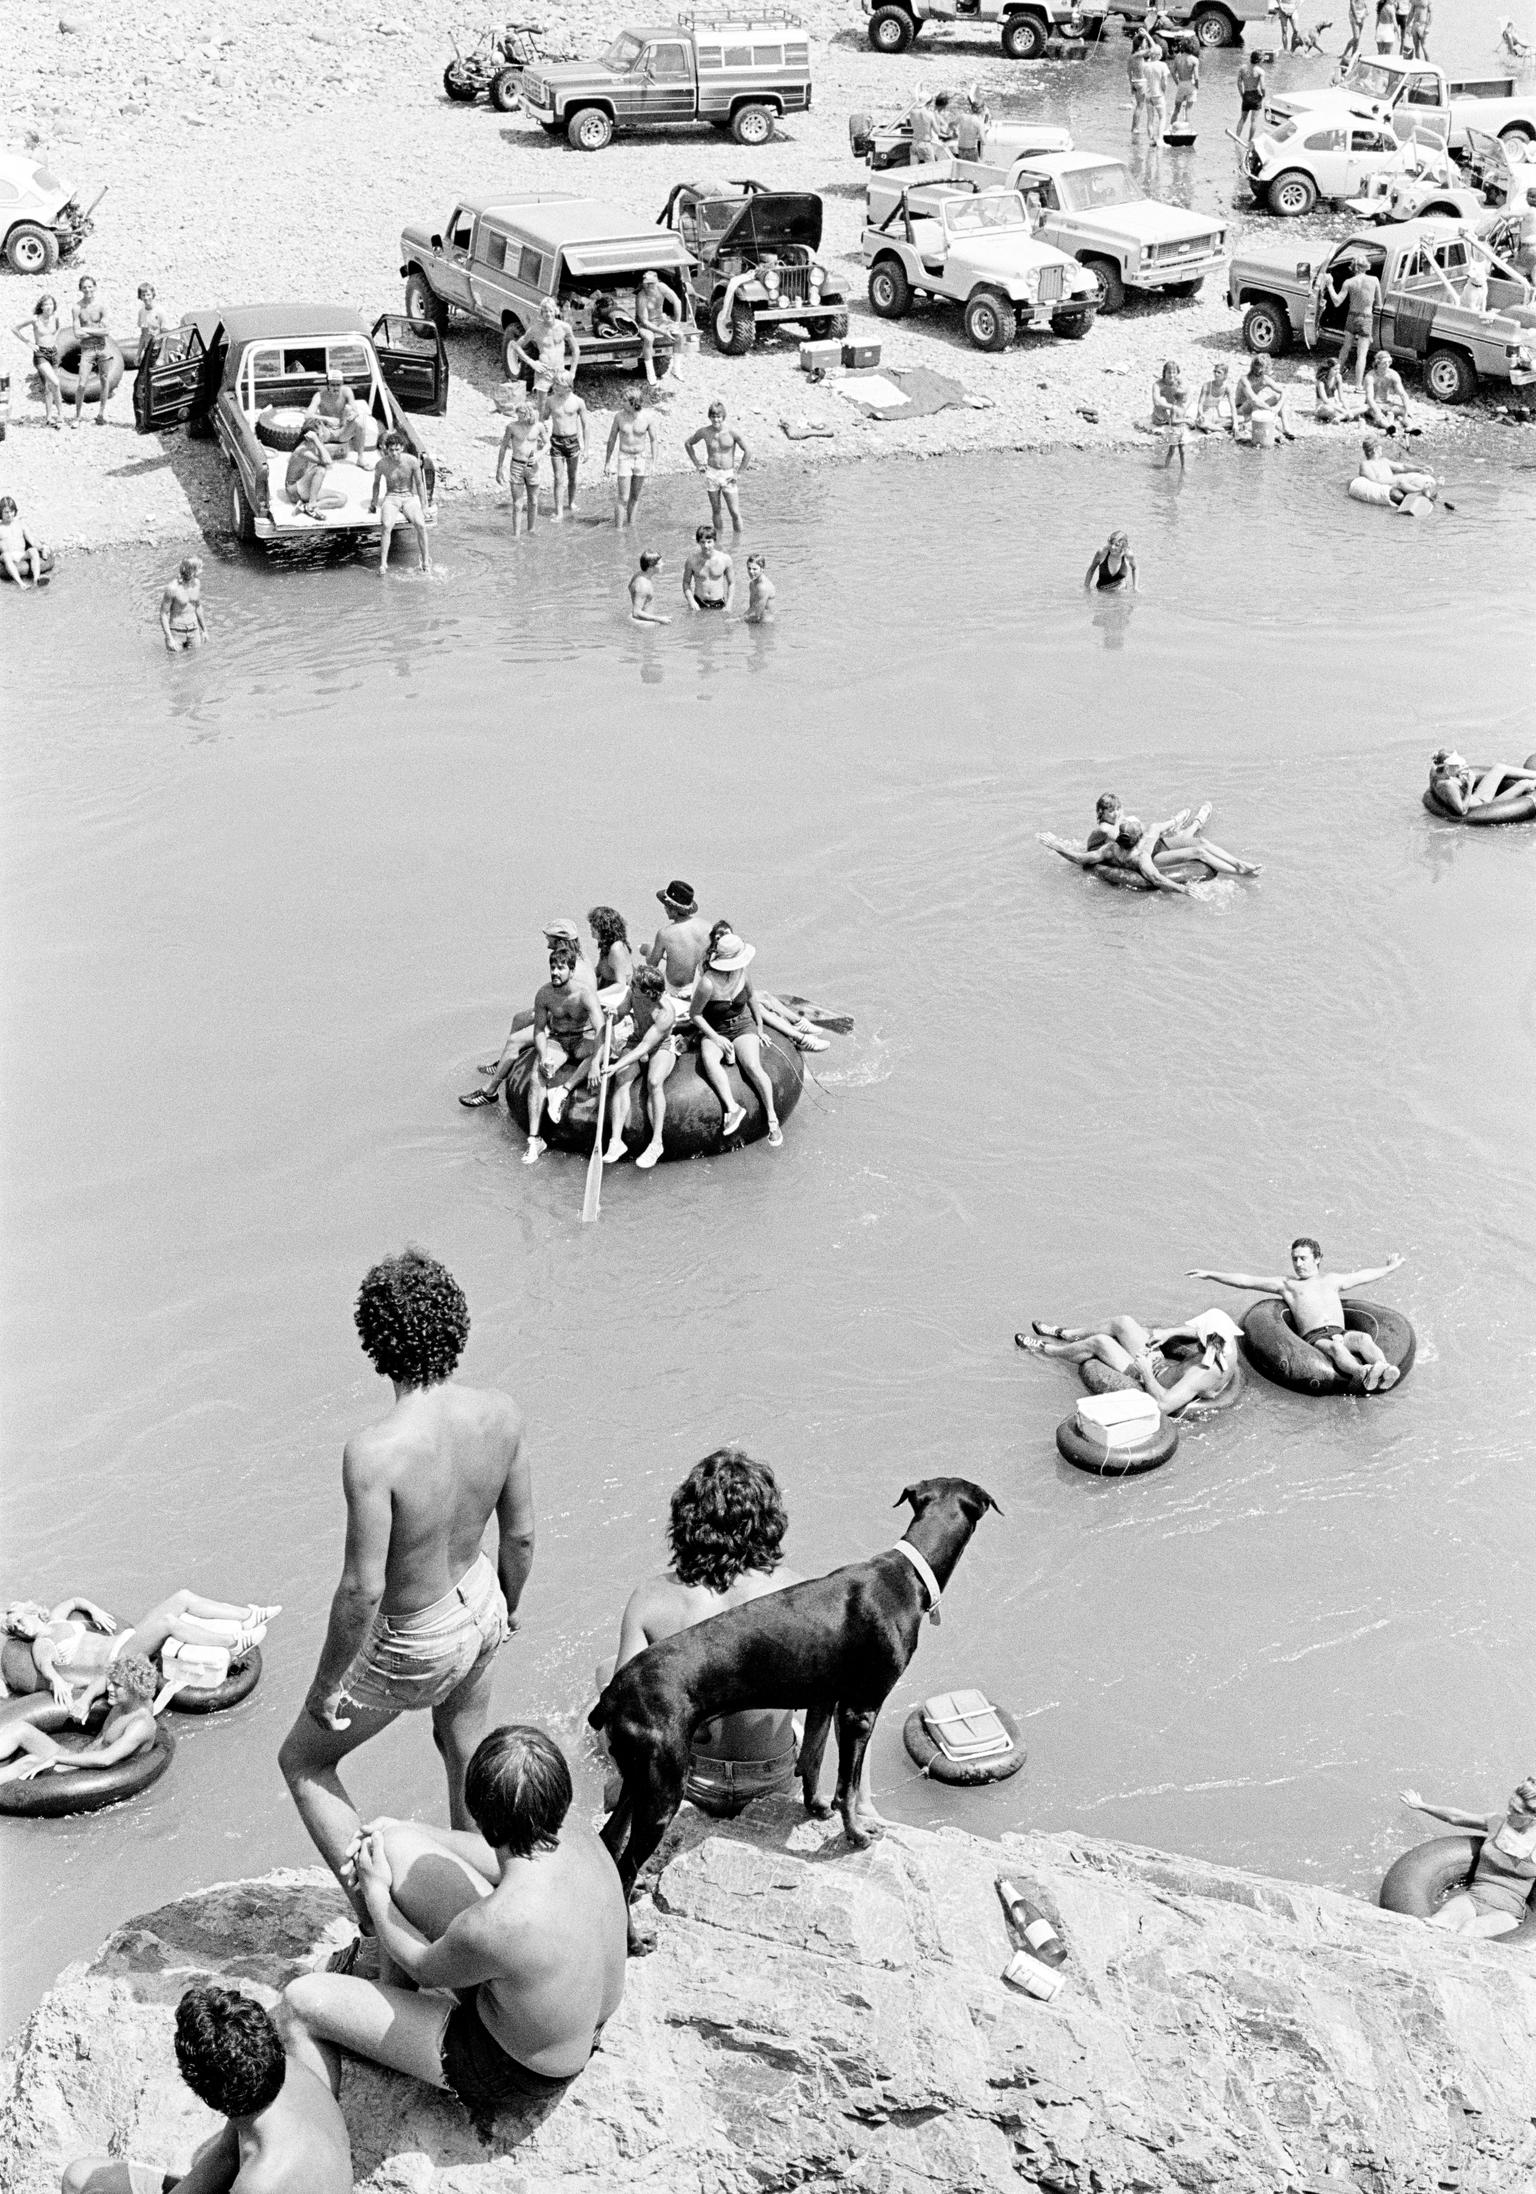 At the height of summer one of the favourite activities of the mainly young is tubing. Salt River, Arizona USA